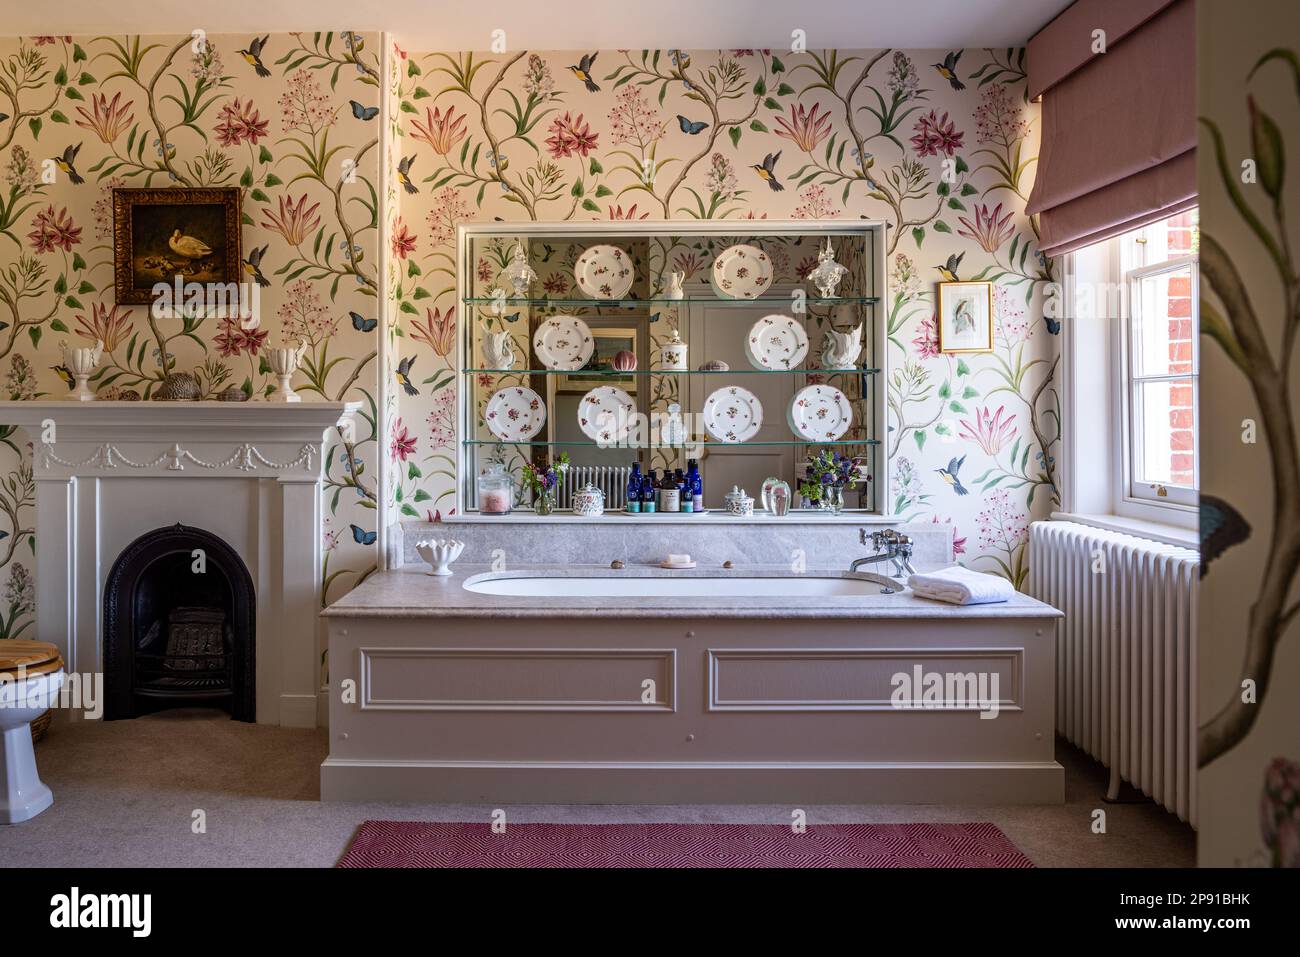 Sanderson wallpaper with plates displayed on mirrored shelves in18th century Grade II listed Suffolk country house, UK Stock Photo